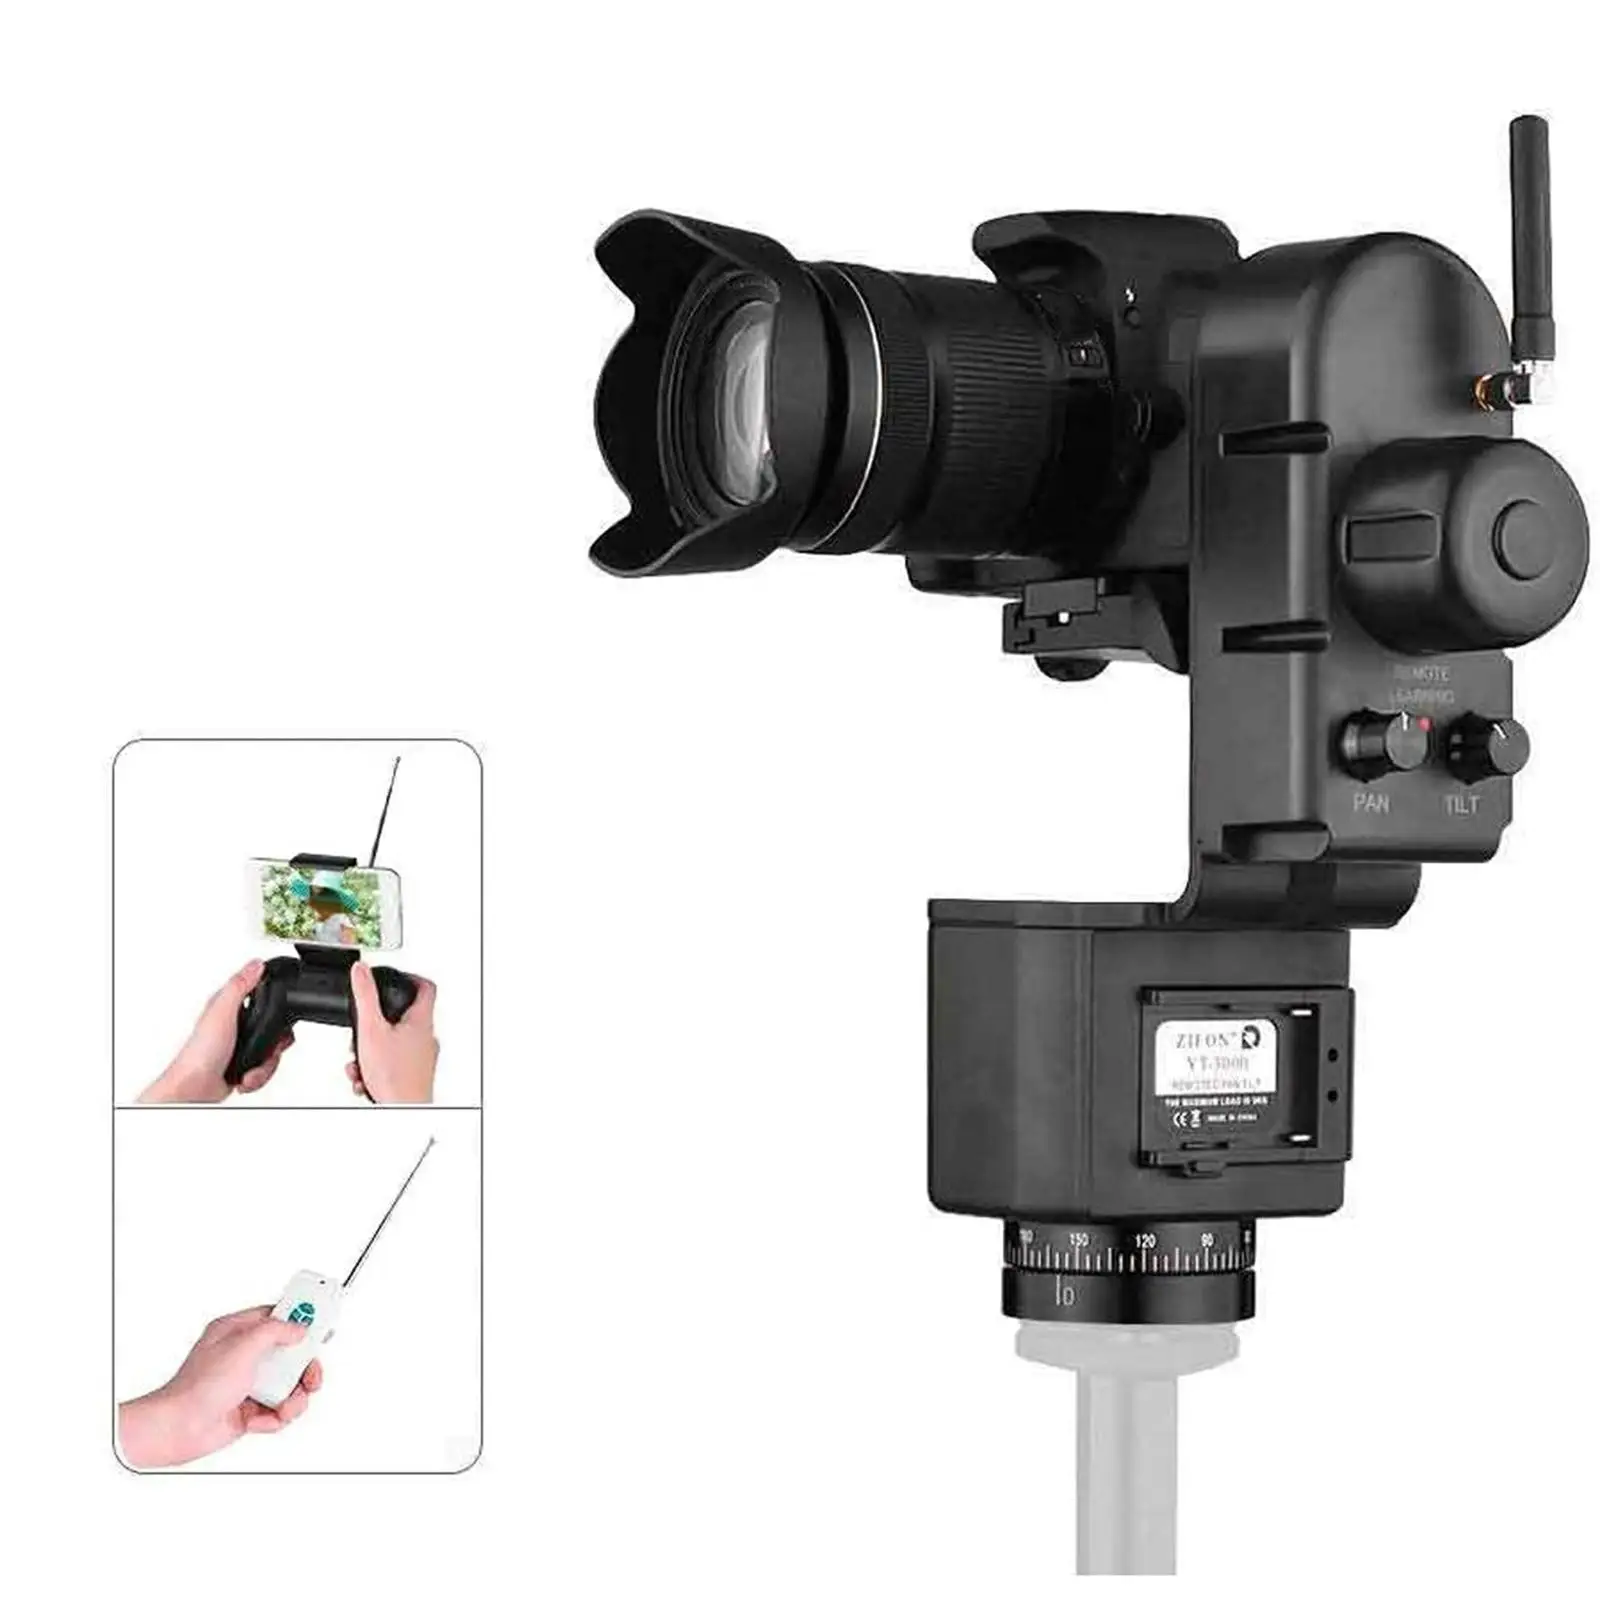 Motorized Pan Tilt Head Remote Control for DSLR Camera, for Panorama Accessories